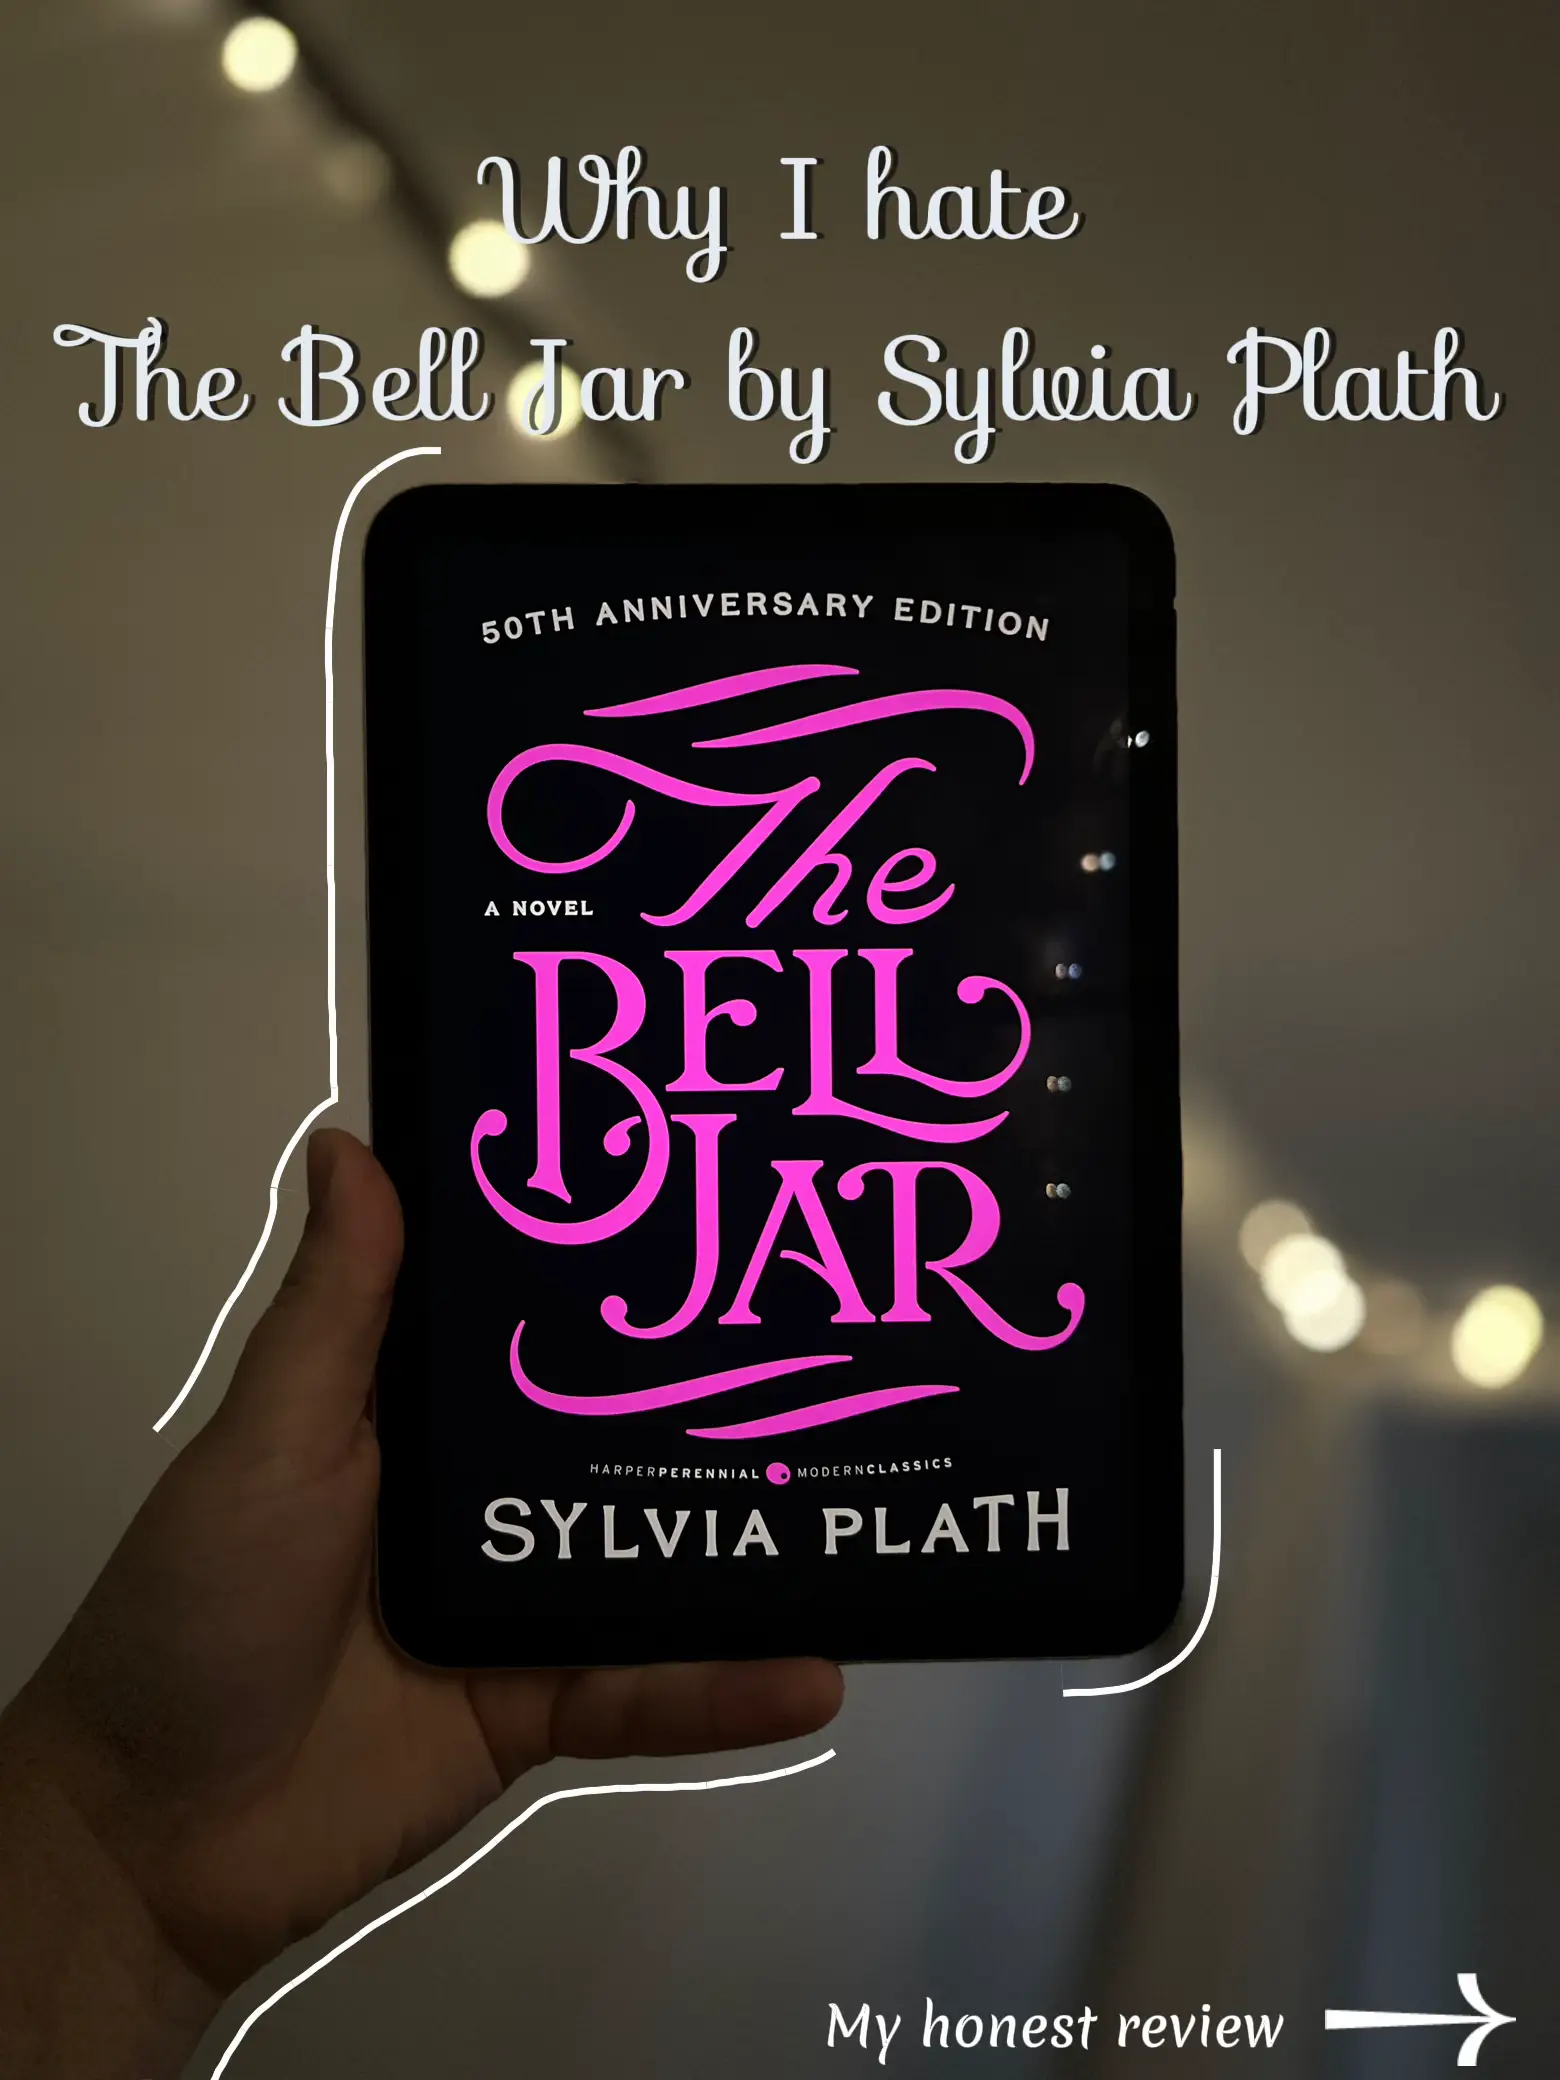 15 Astounding Facts About The Bell Jar - Sylvia Plath 